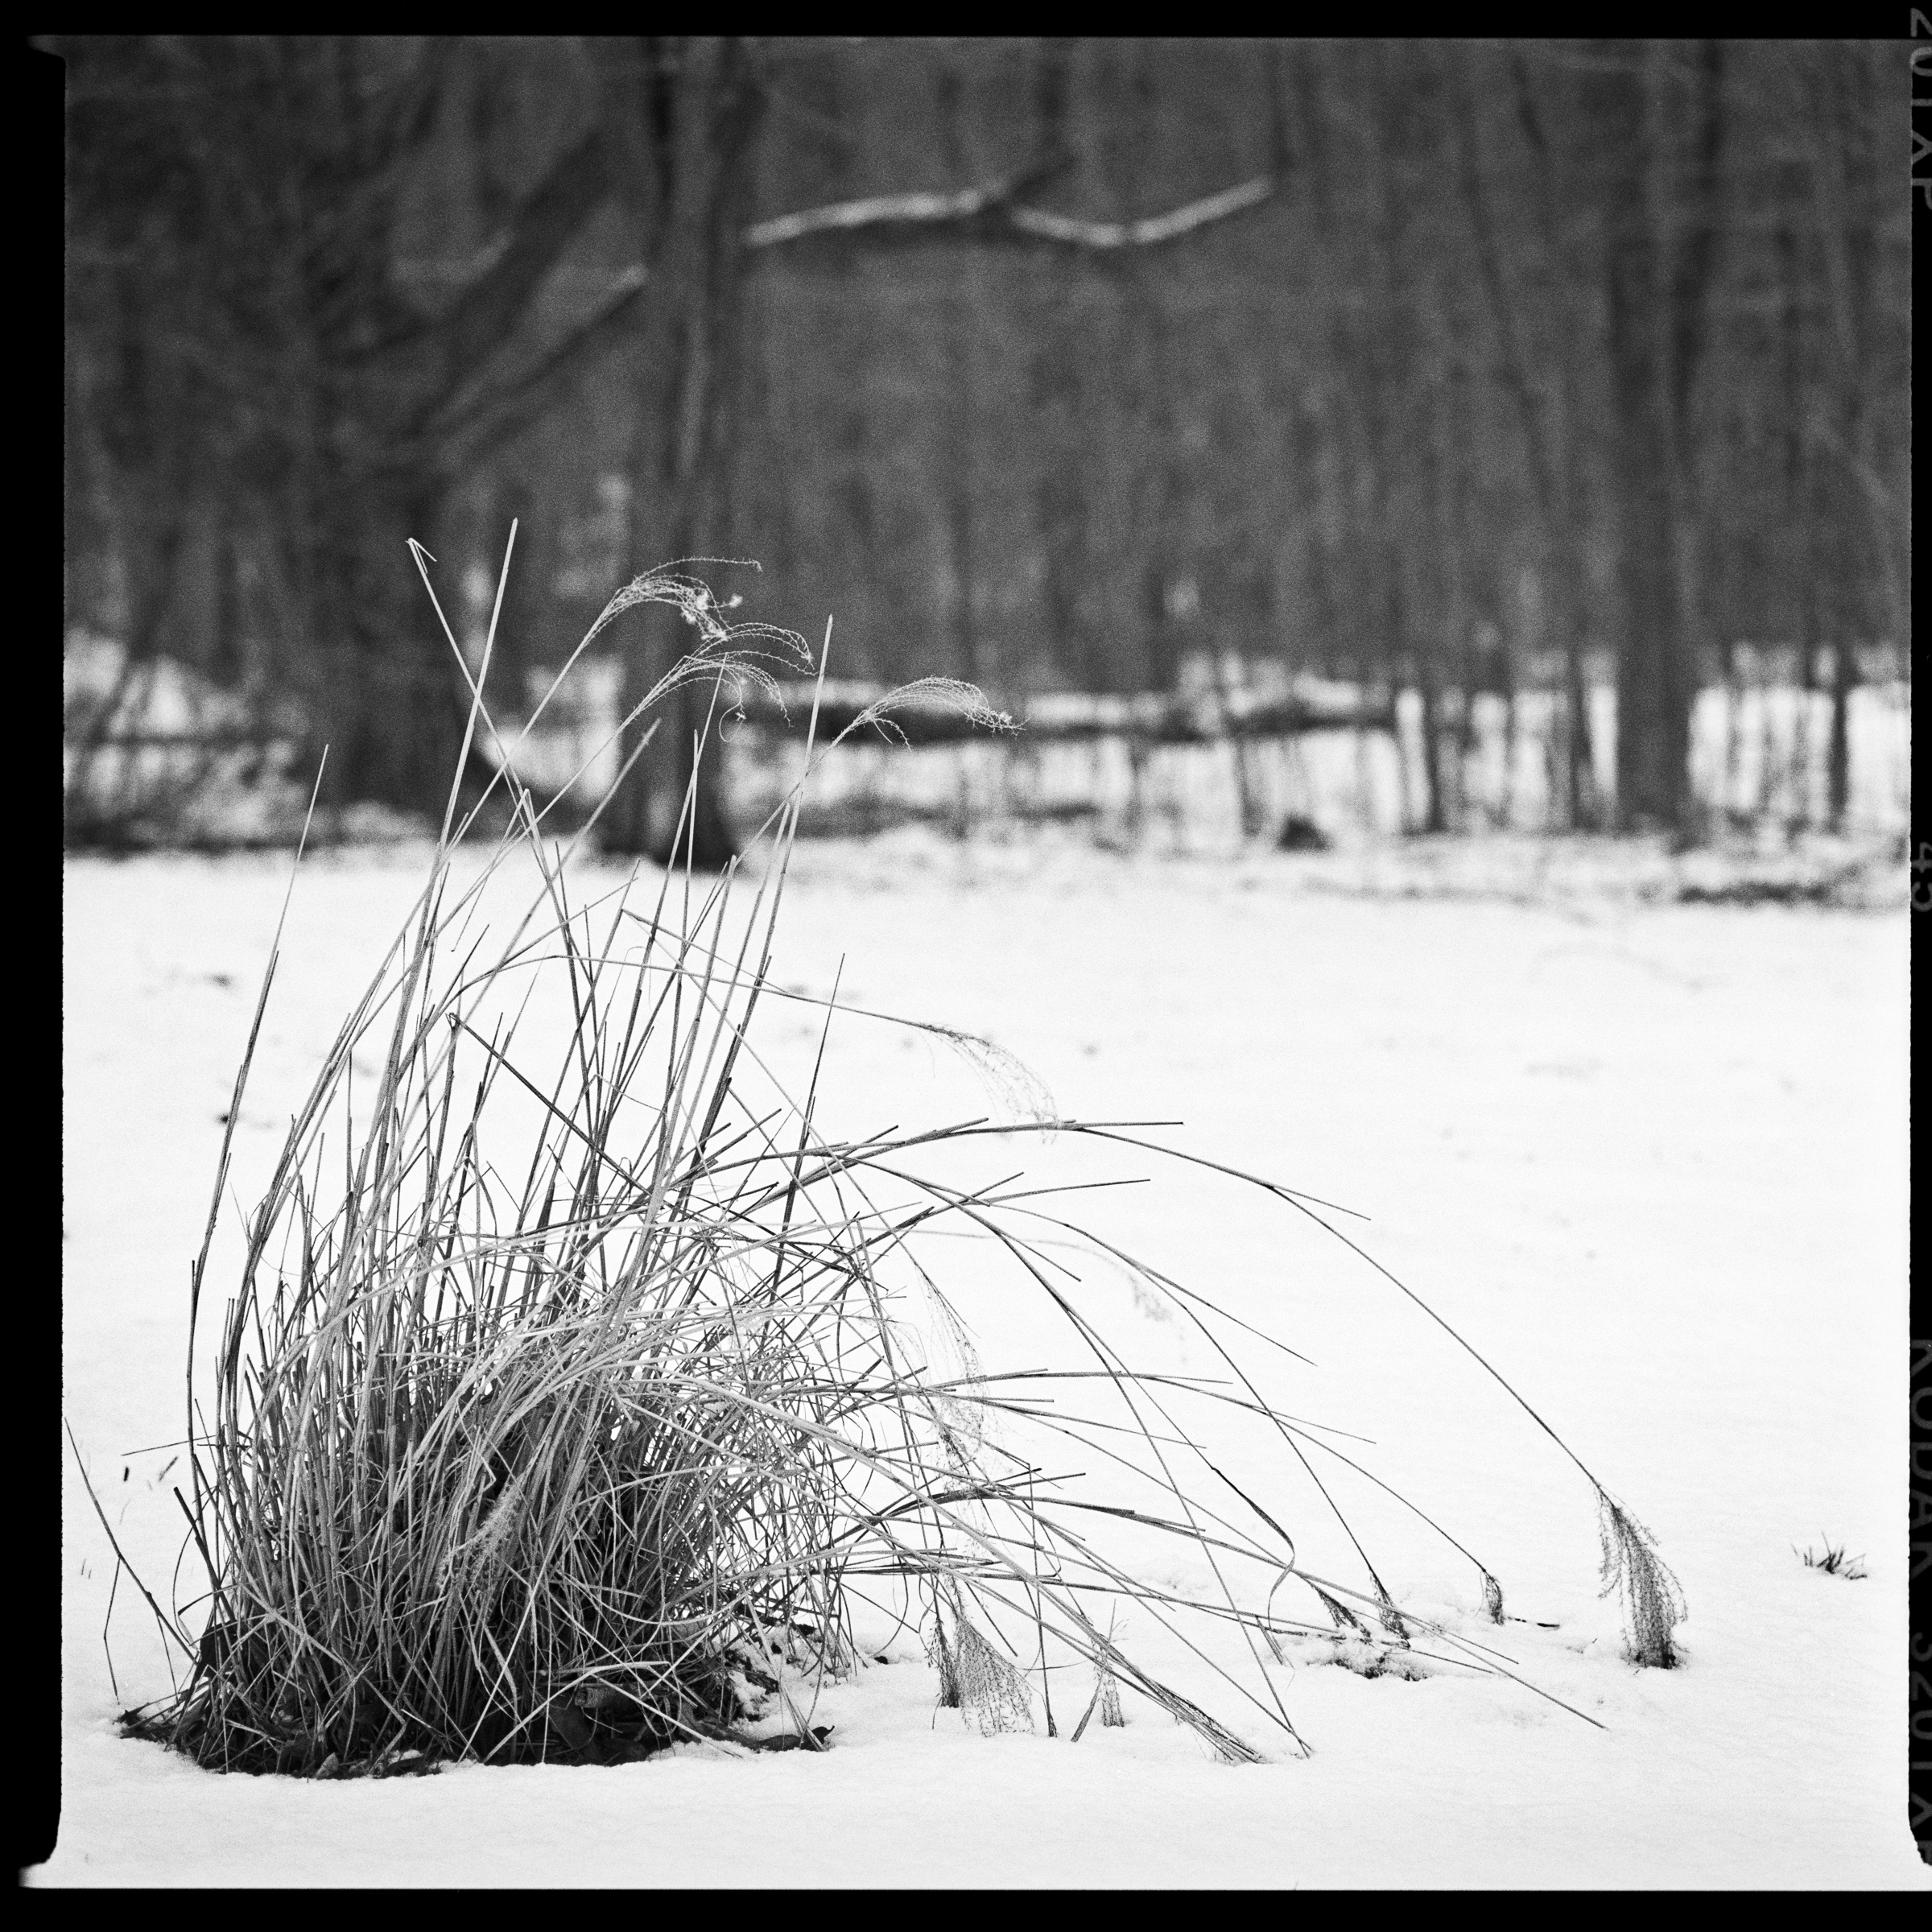 Black and white photo of a clump of grass in a snowy field, with woods in the background